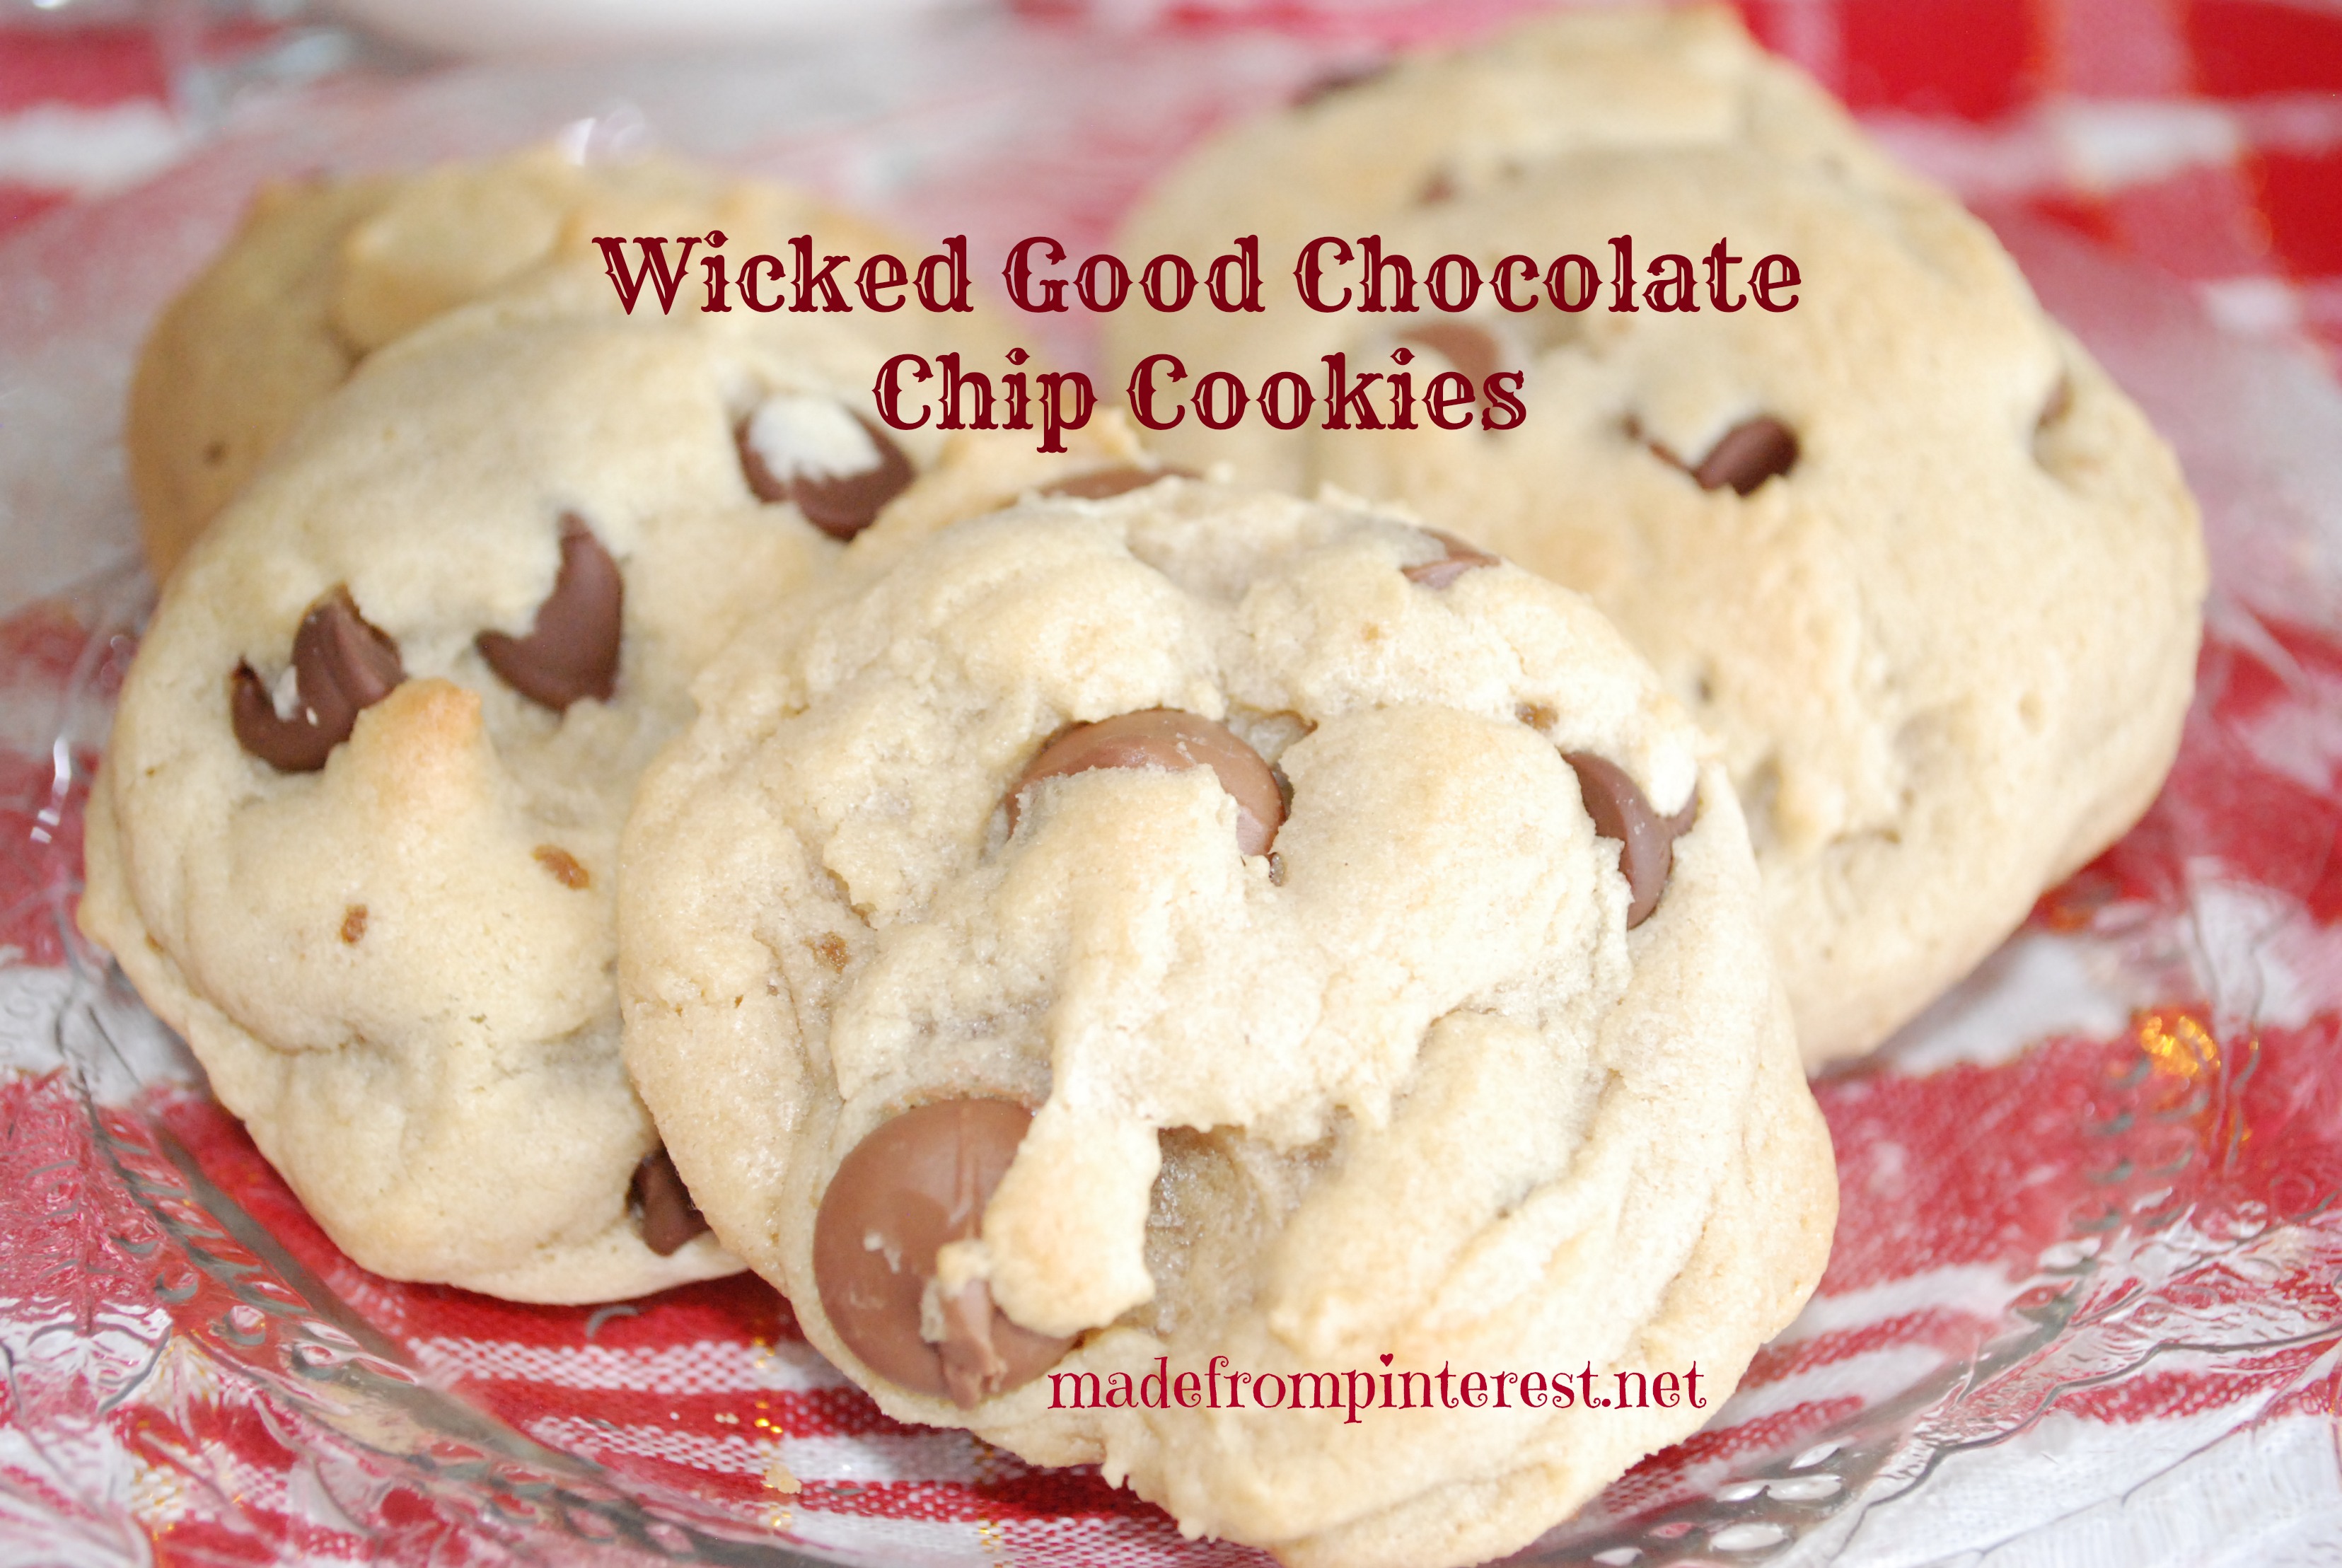 Wicked Good Chocolate Chip Cookies